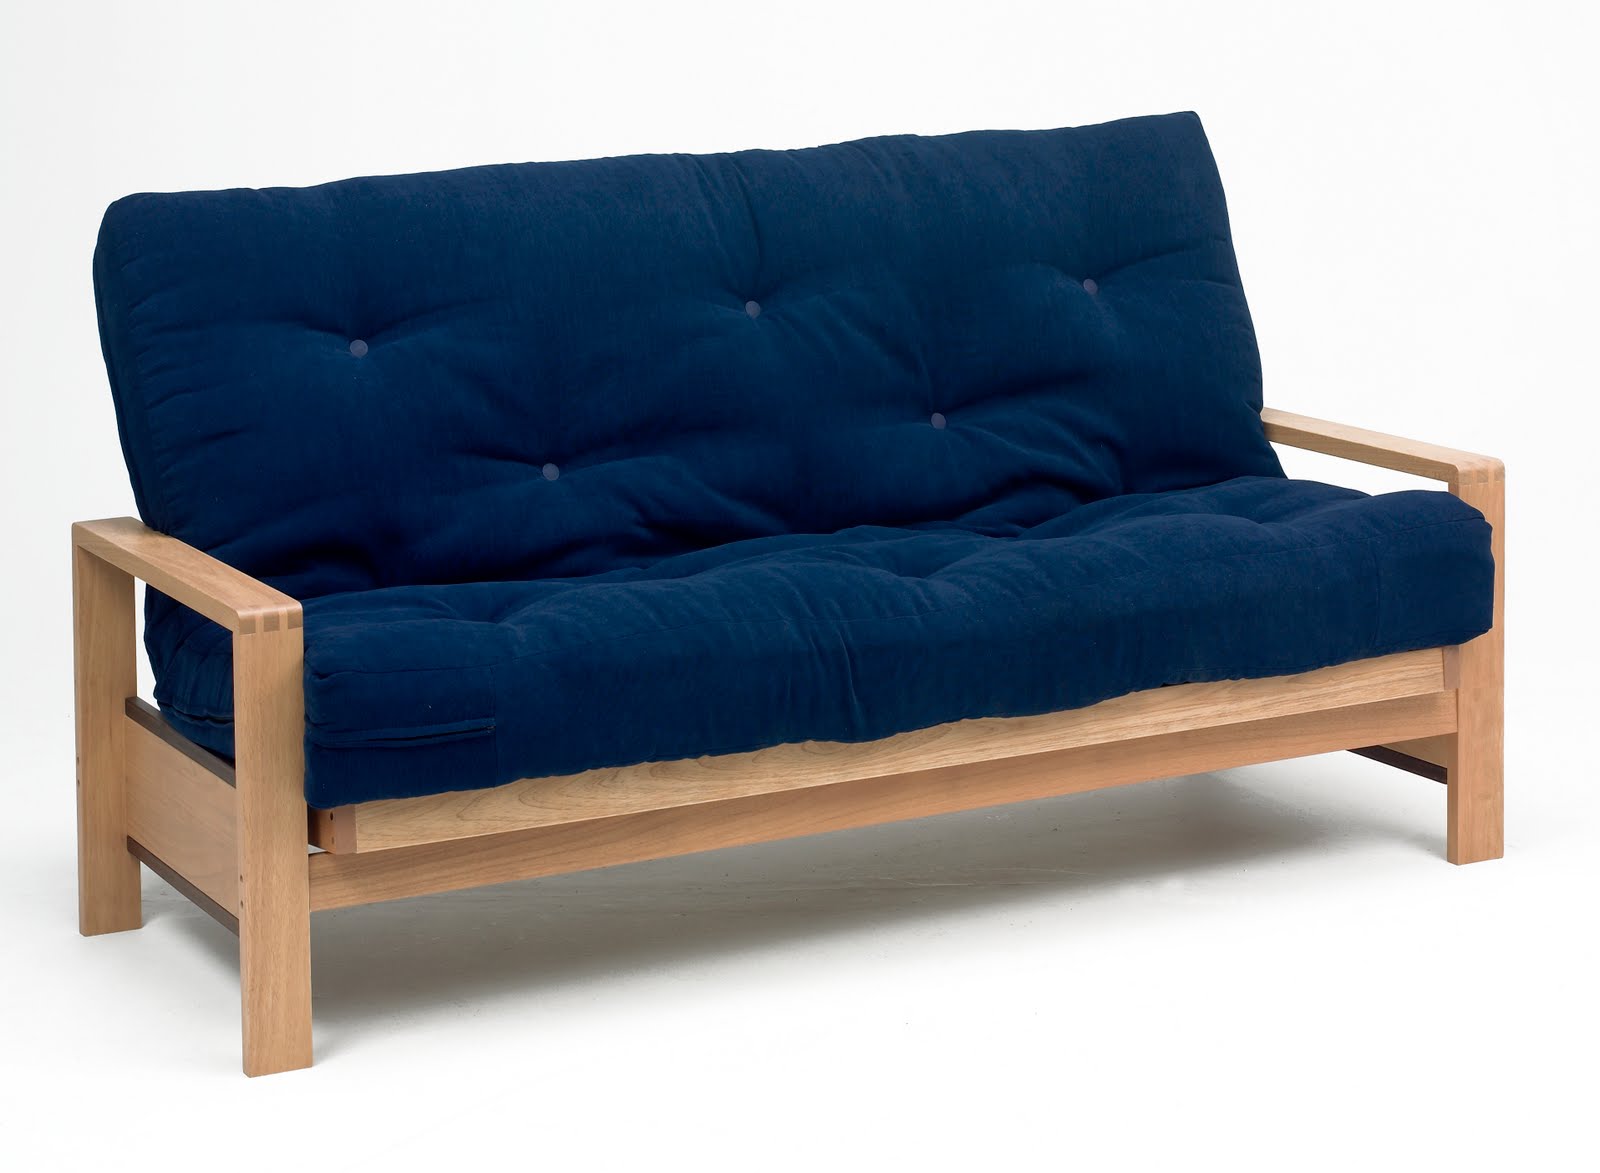 Futons for sale near me – Furniture table styles